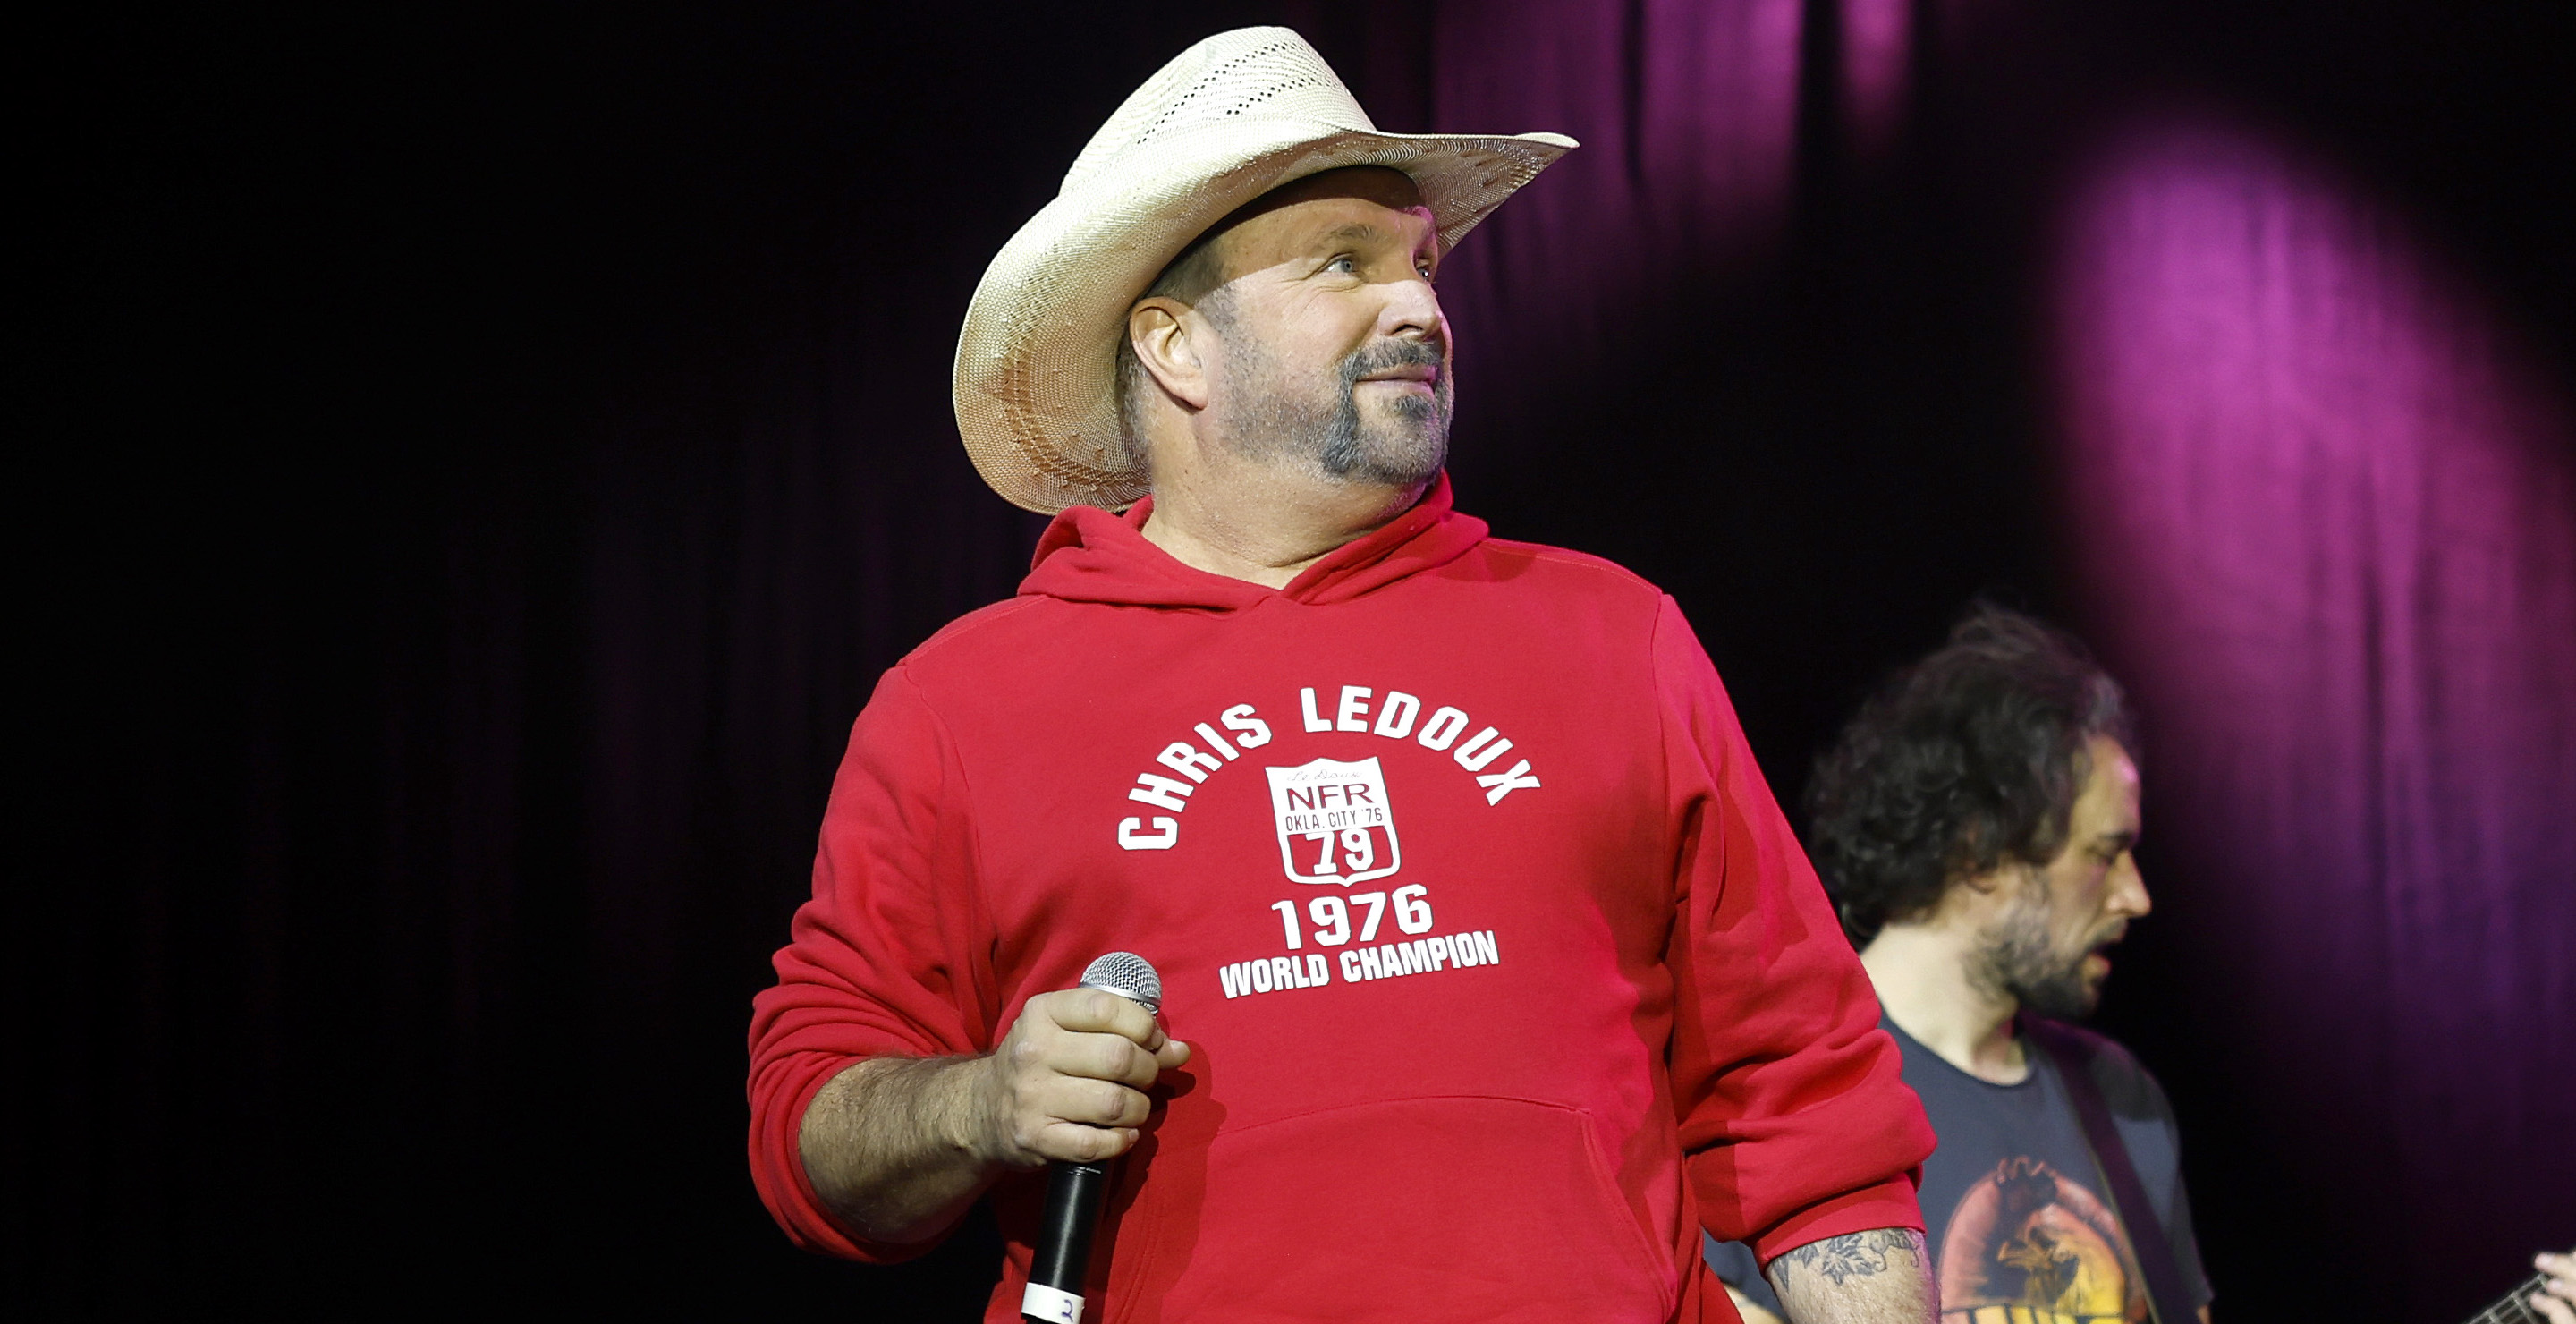 Garth Brooks Turned Down Starring Role In 'Twister' Over Insane Demand